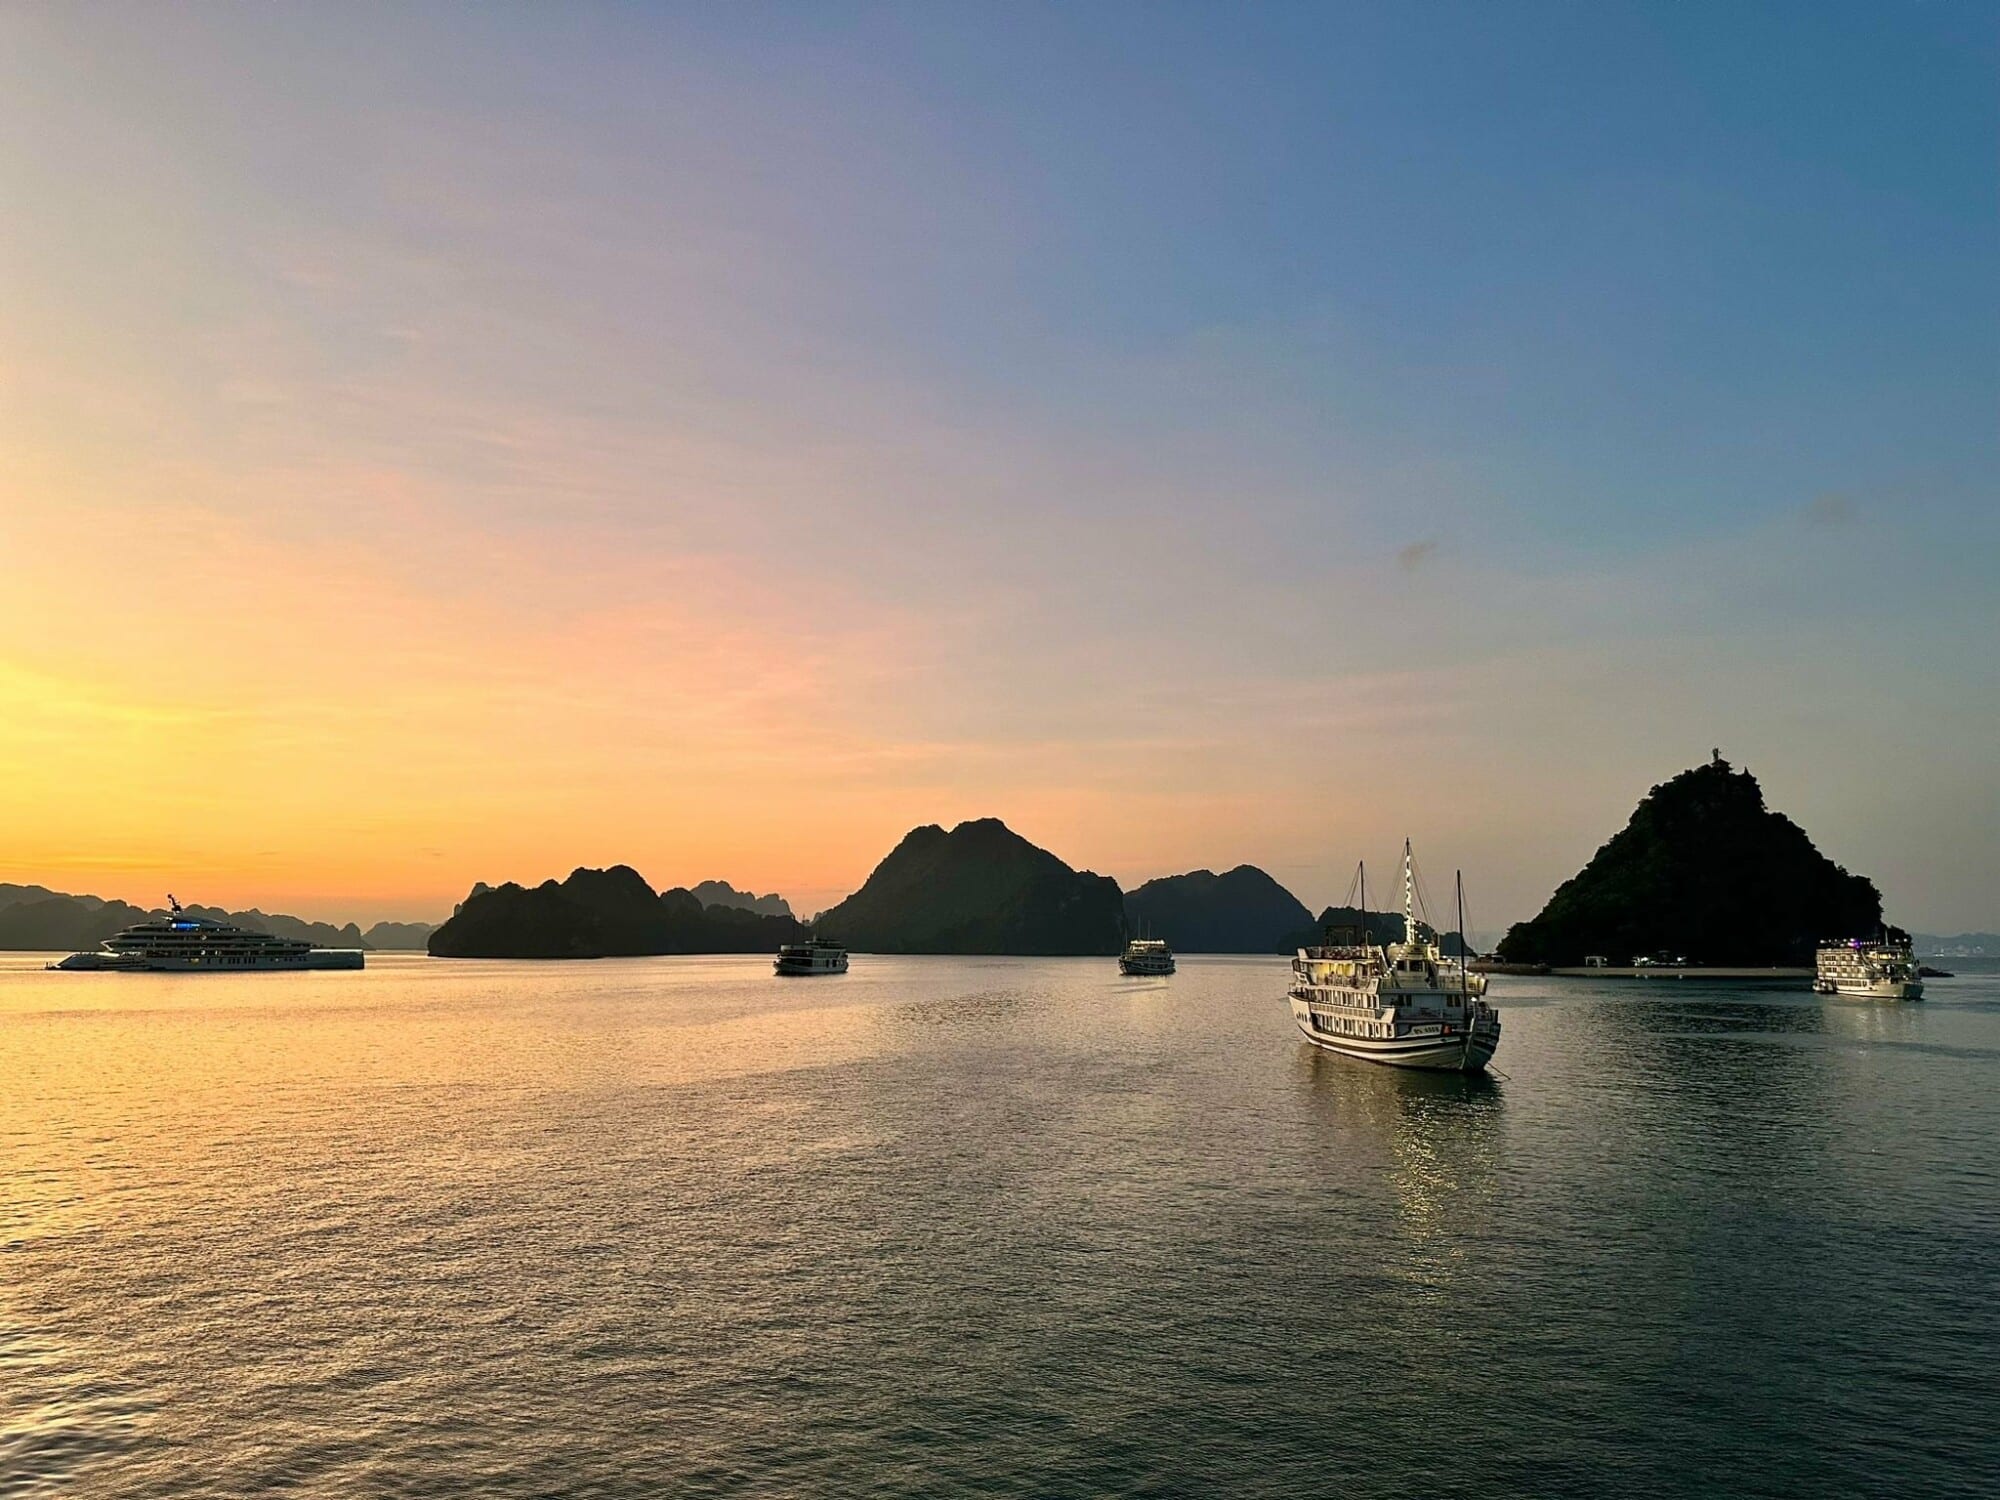 Sunset moment in Halong Bay